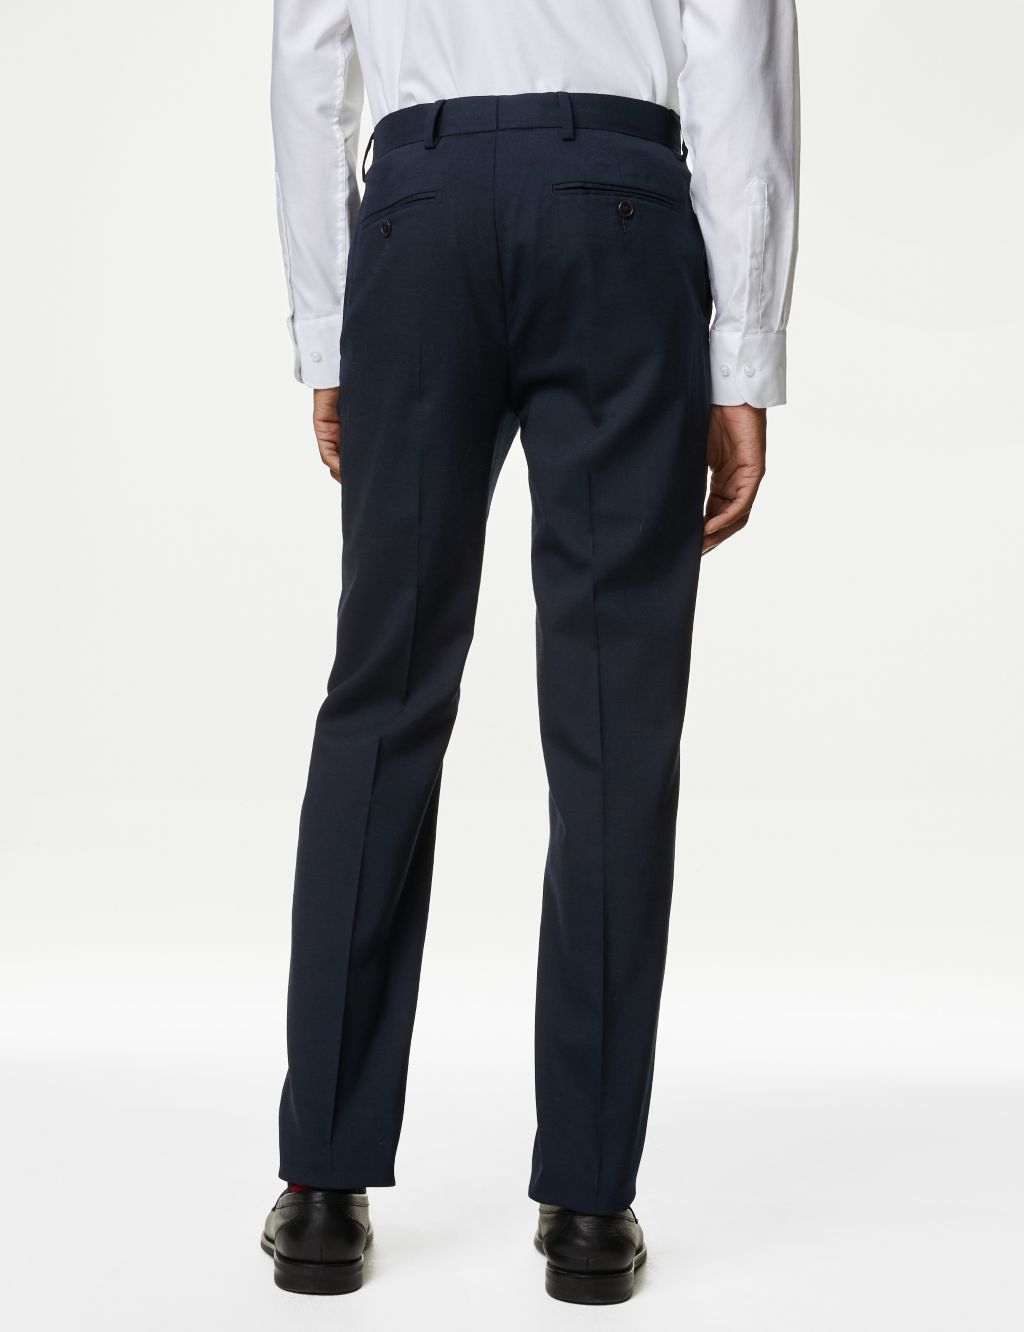 Wool Blend Flat Front Stretch Trousers image 5